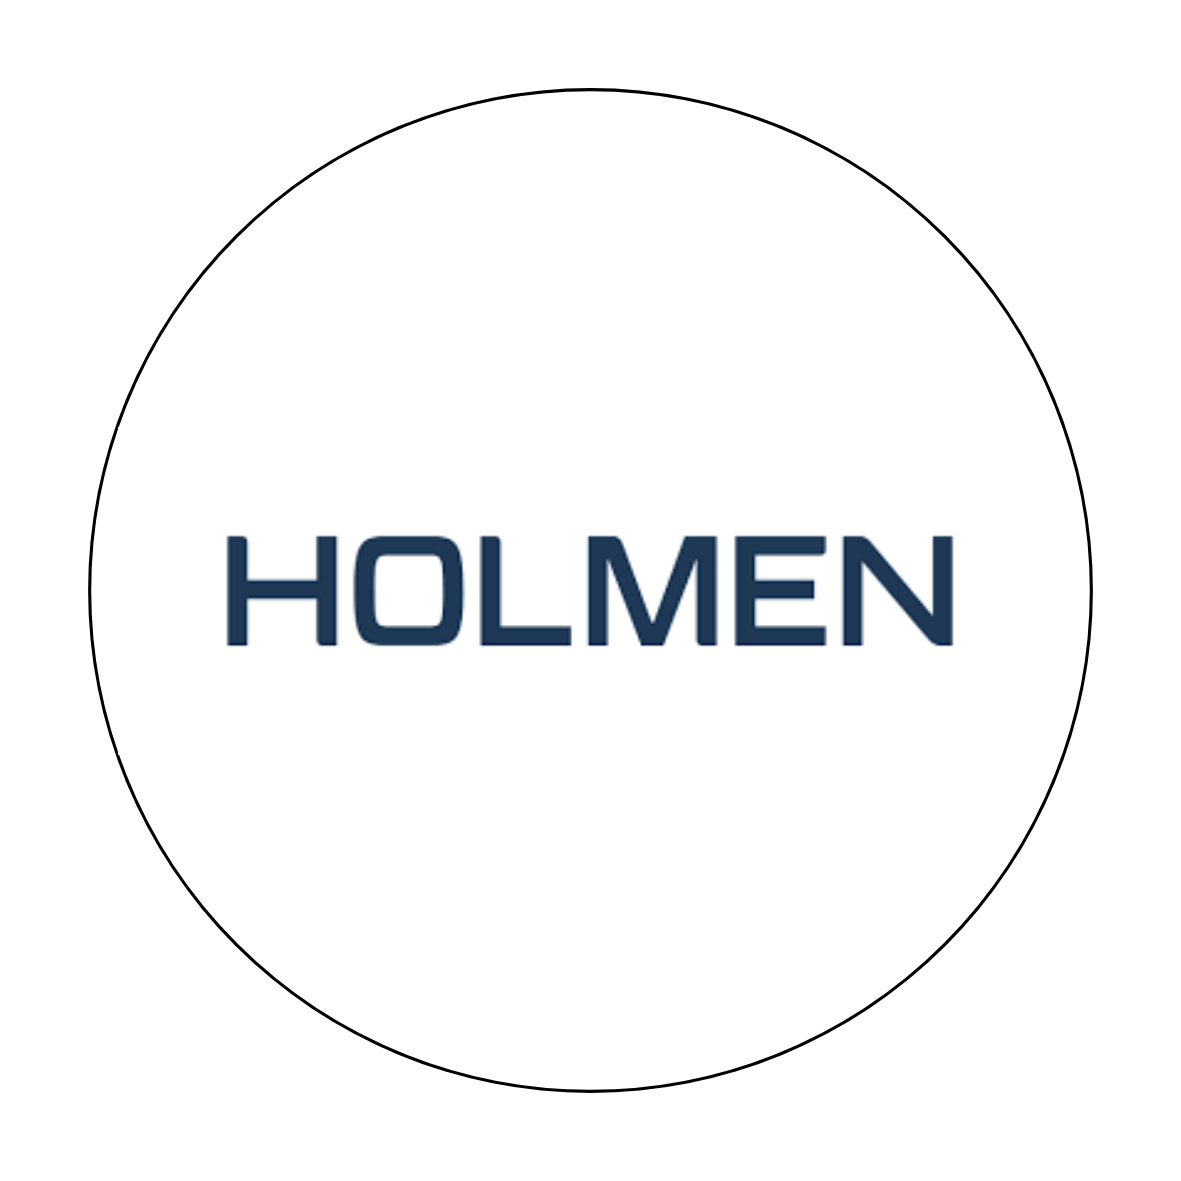 Holmen client of Playerence logo